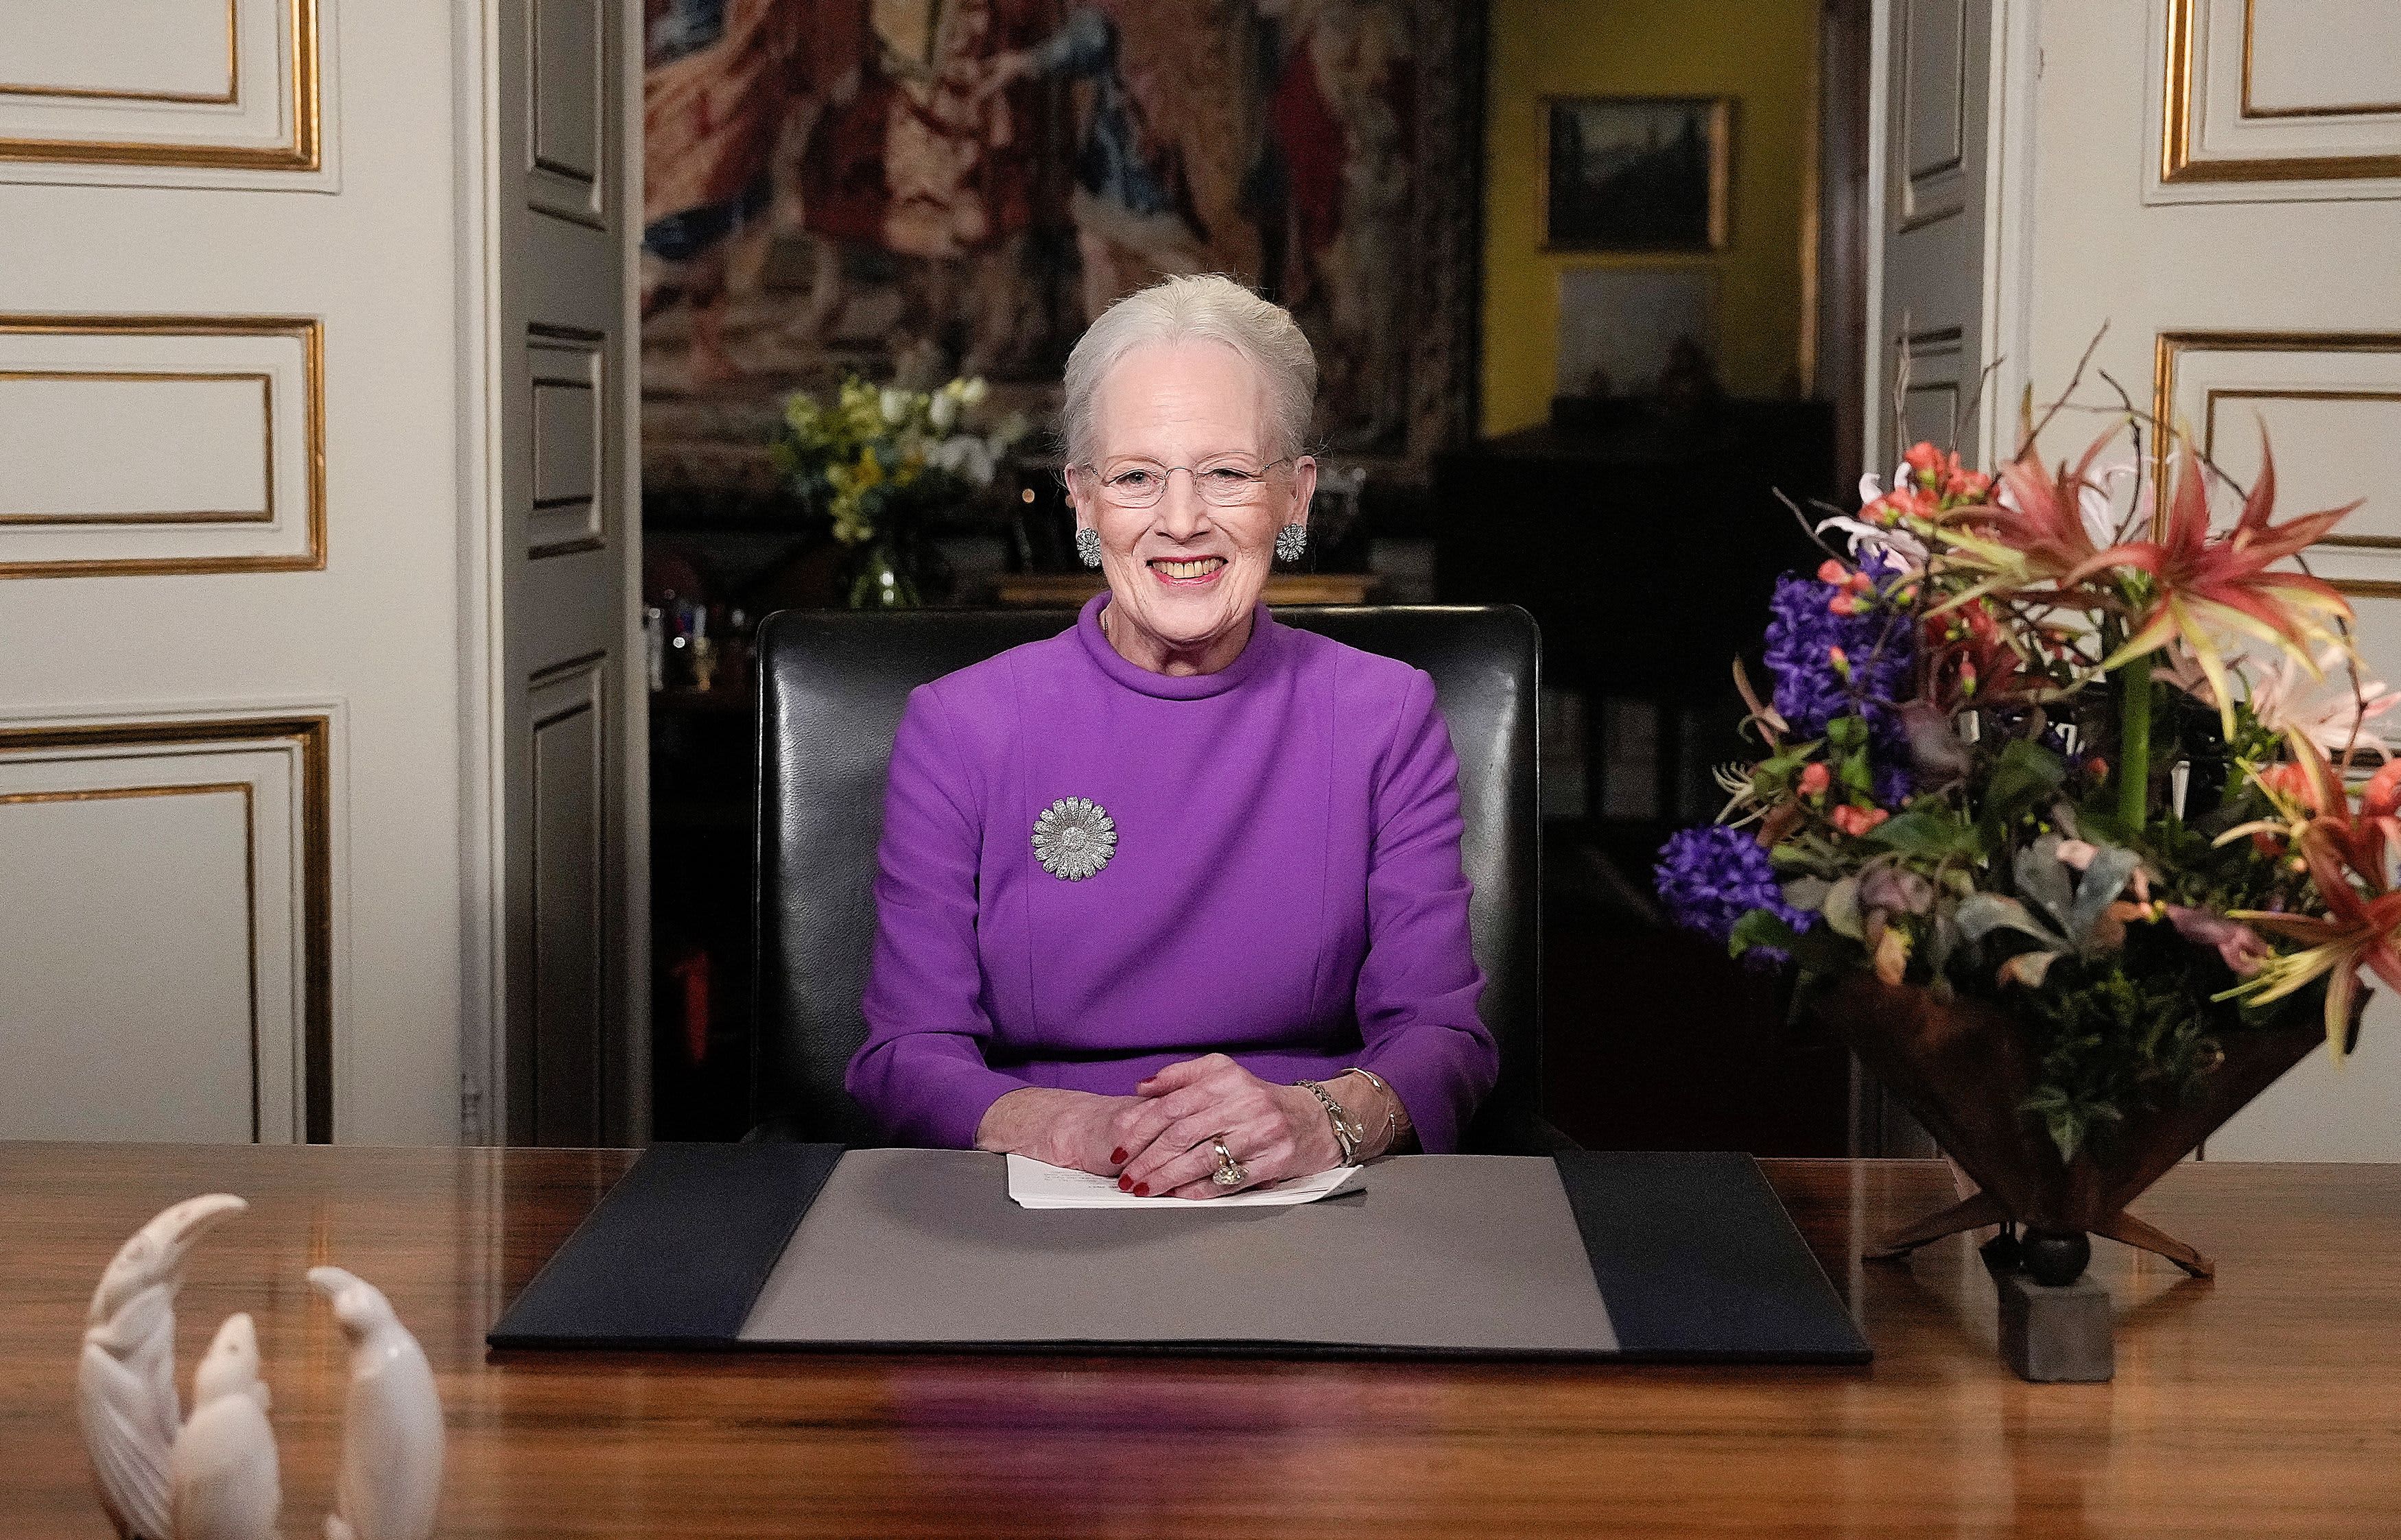 Denmark’s Queen Margrethe II announces she will abdicate the throne on Jan. 14